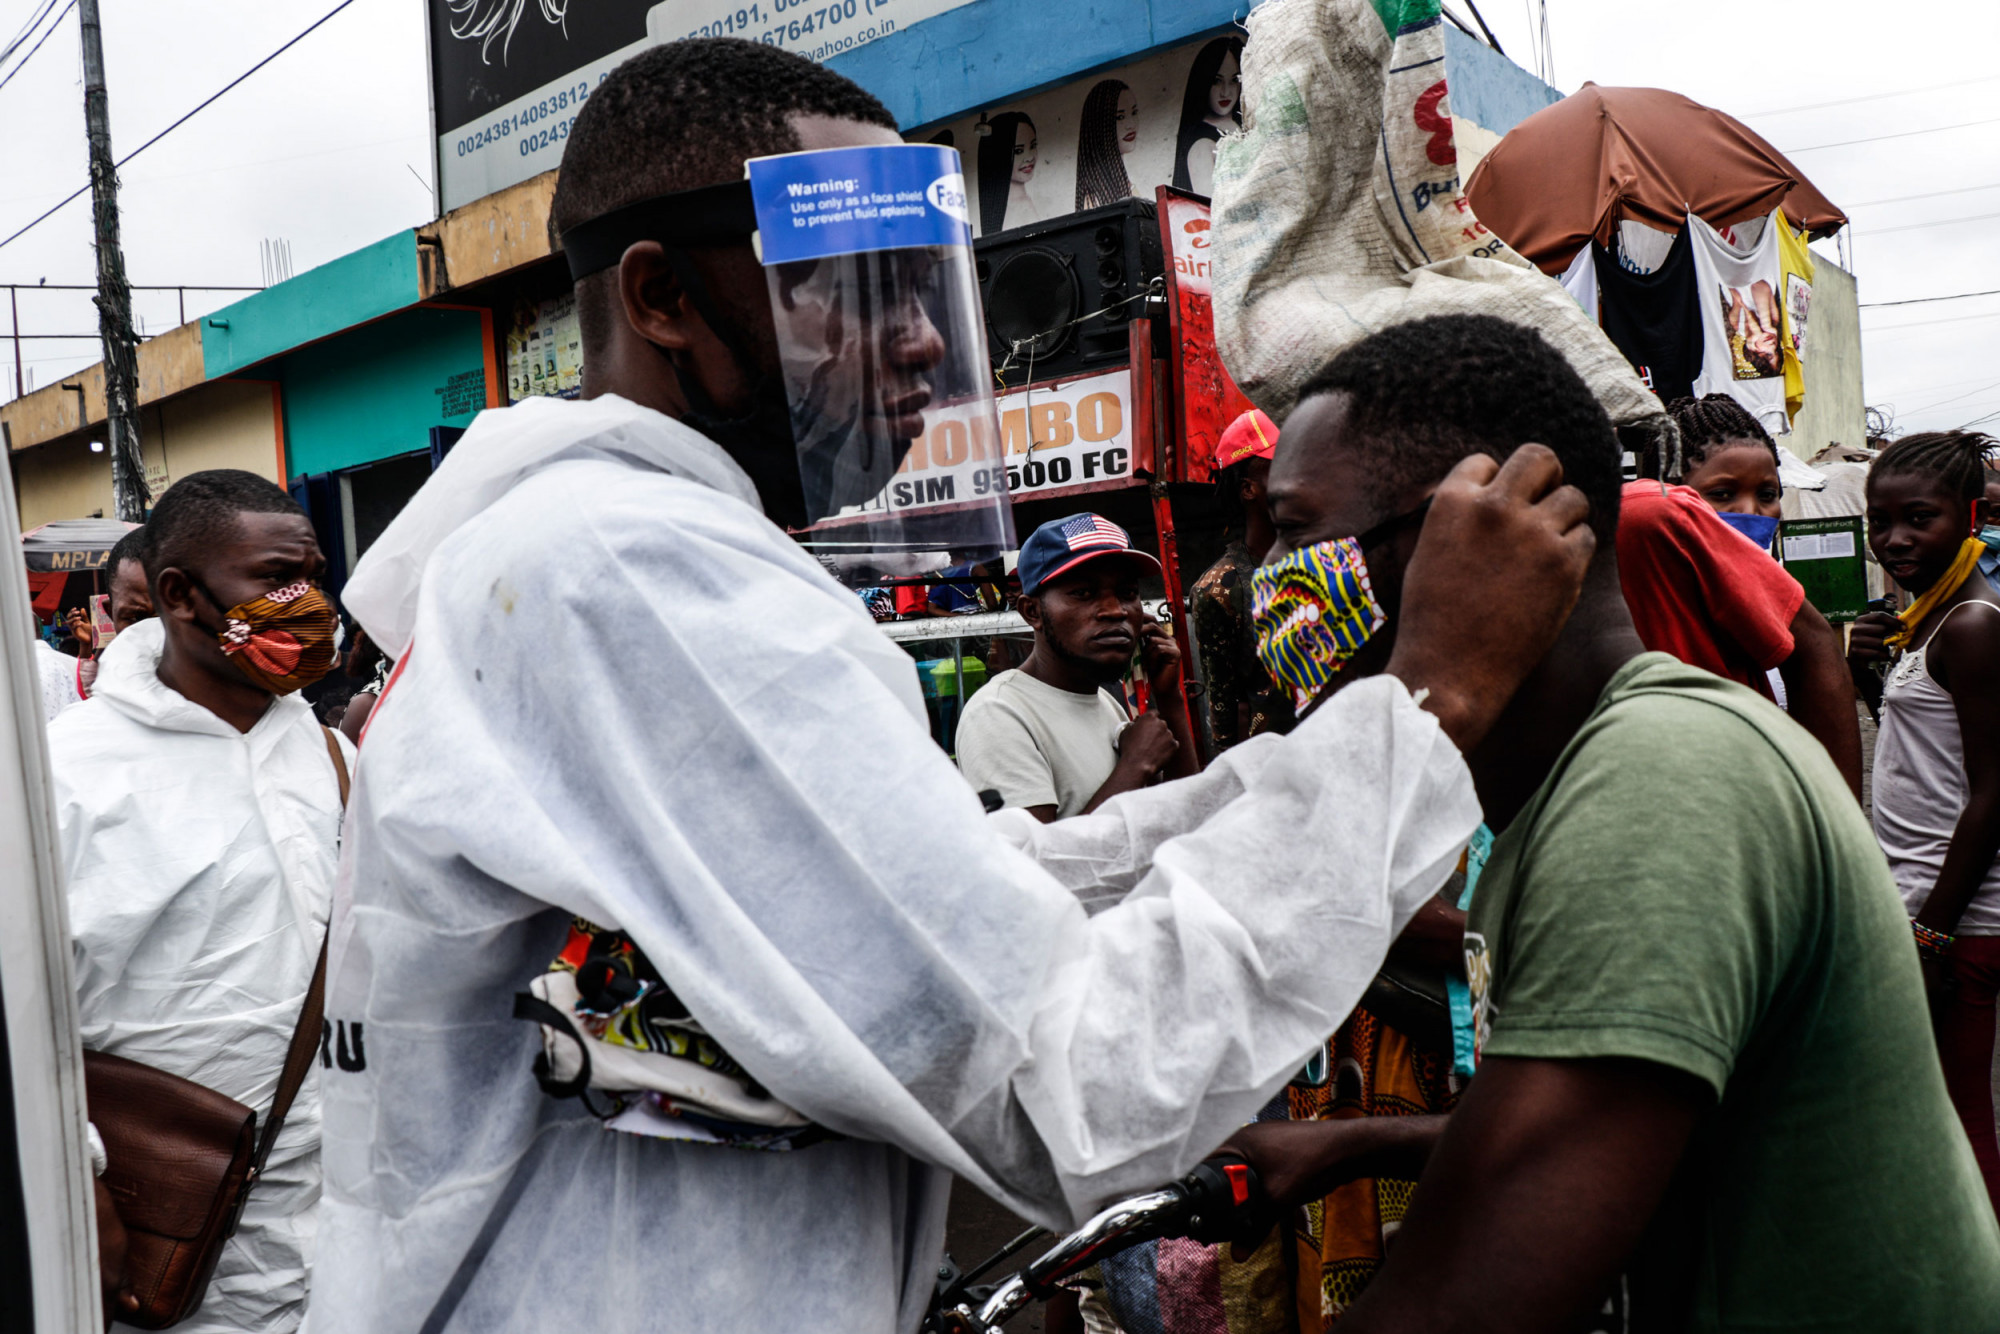 Kinshasa, DRC, May 2020. Members of the pro-democracy and civil society movement Filimibi (« whistle » in swahili) hand out masks while carrying out a public educational campaign about coronavirus in a market in Congo’s capital Kinshasa in May. © Justin Makangara for Fondation Carmignac